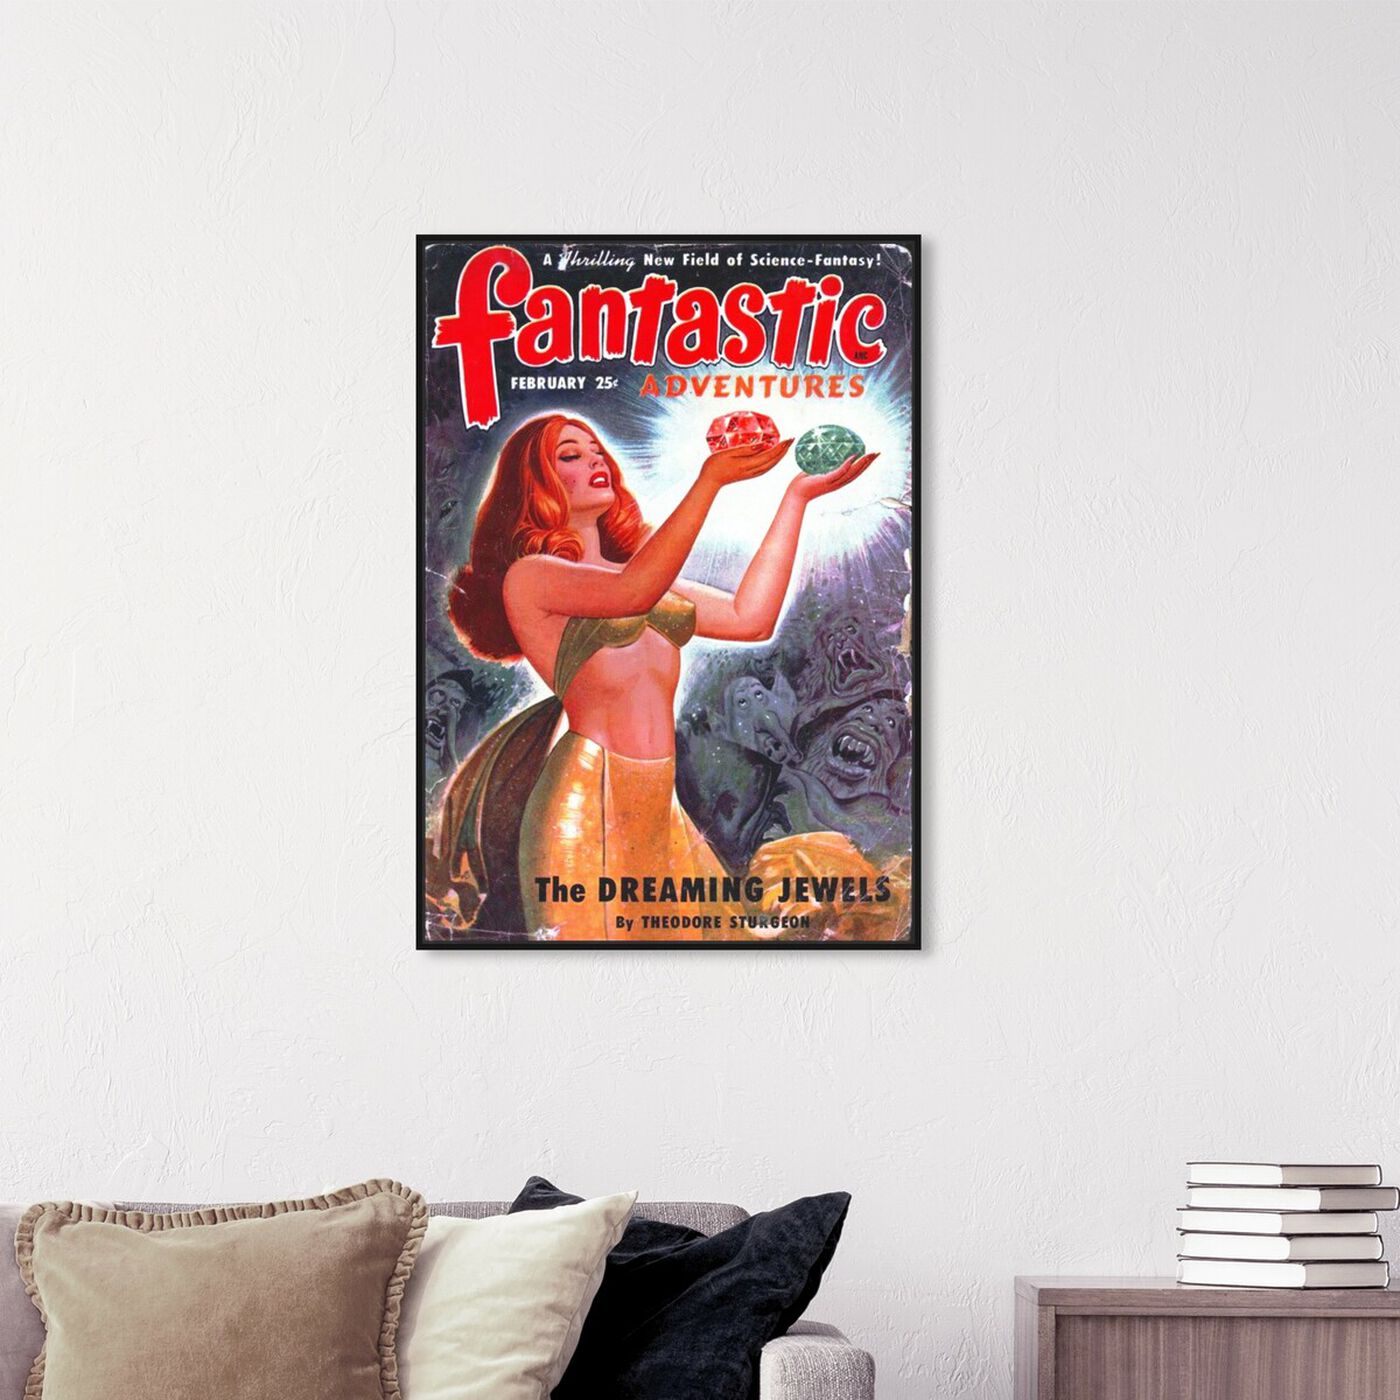 Hanging view of Fantastic Adventures featuring advertising and posters art.